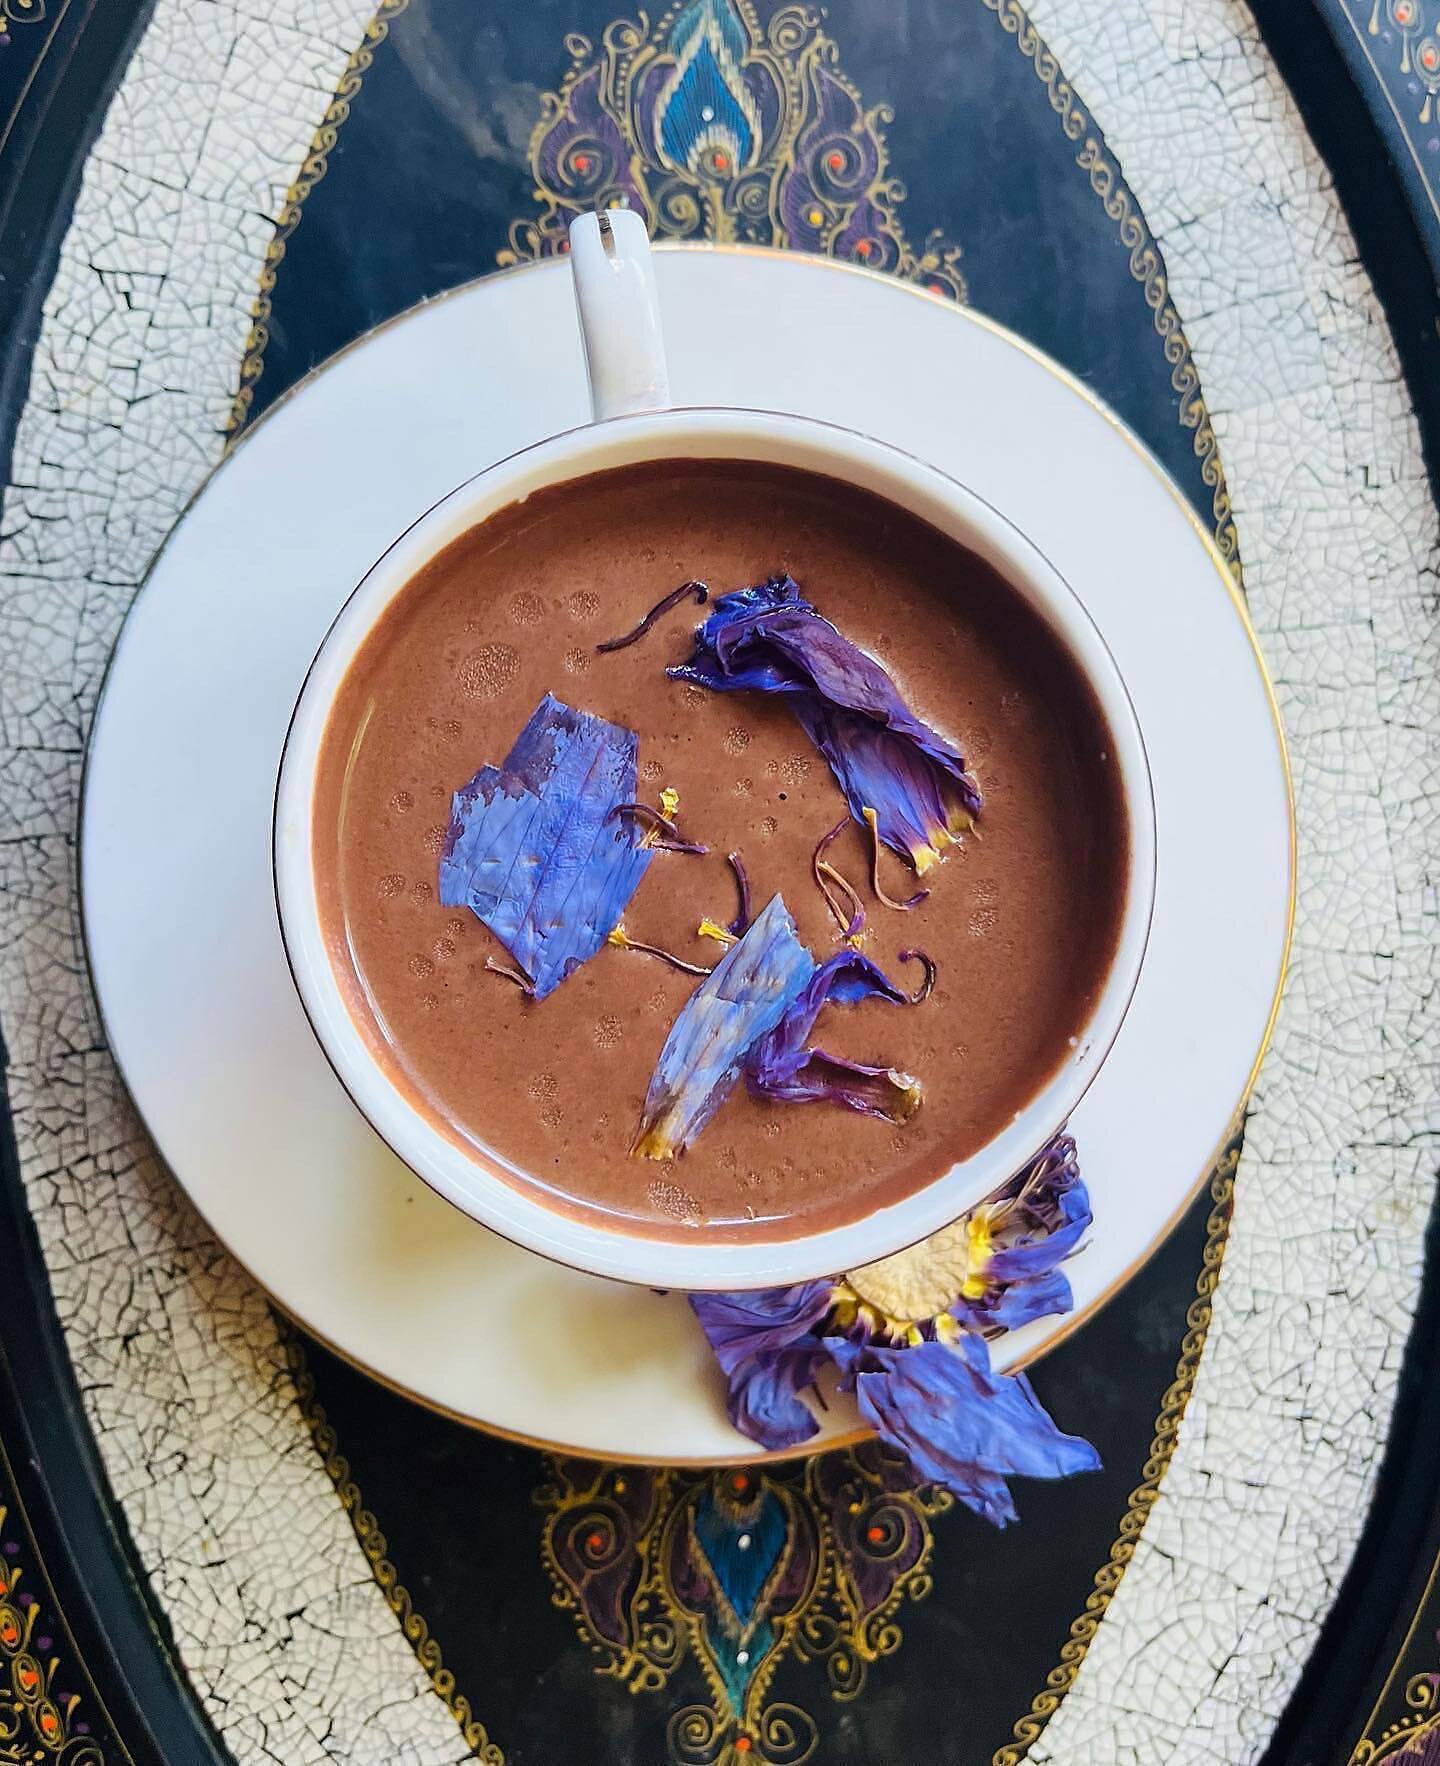 A blend of heart opening cacaocito 🤎 with powerhouse herbs and mushrooms. Includes: Ashwaganda, Brahmi, Shatavari, Reishi, Lions Mane, Rose, Moringa and beautiful Blue Lotus. 💙💜

It&rsquo;s also so pretty to look at 😍. 
#cacao #holistichealth #se